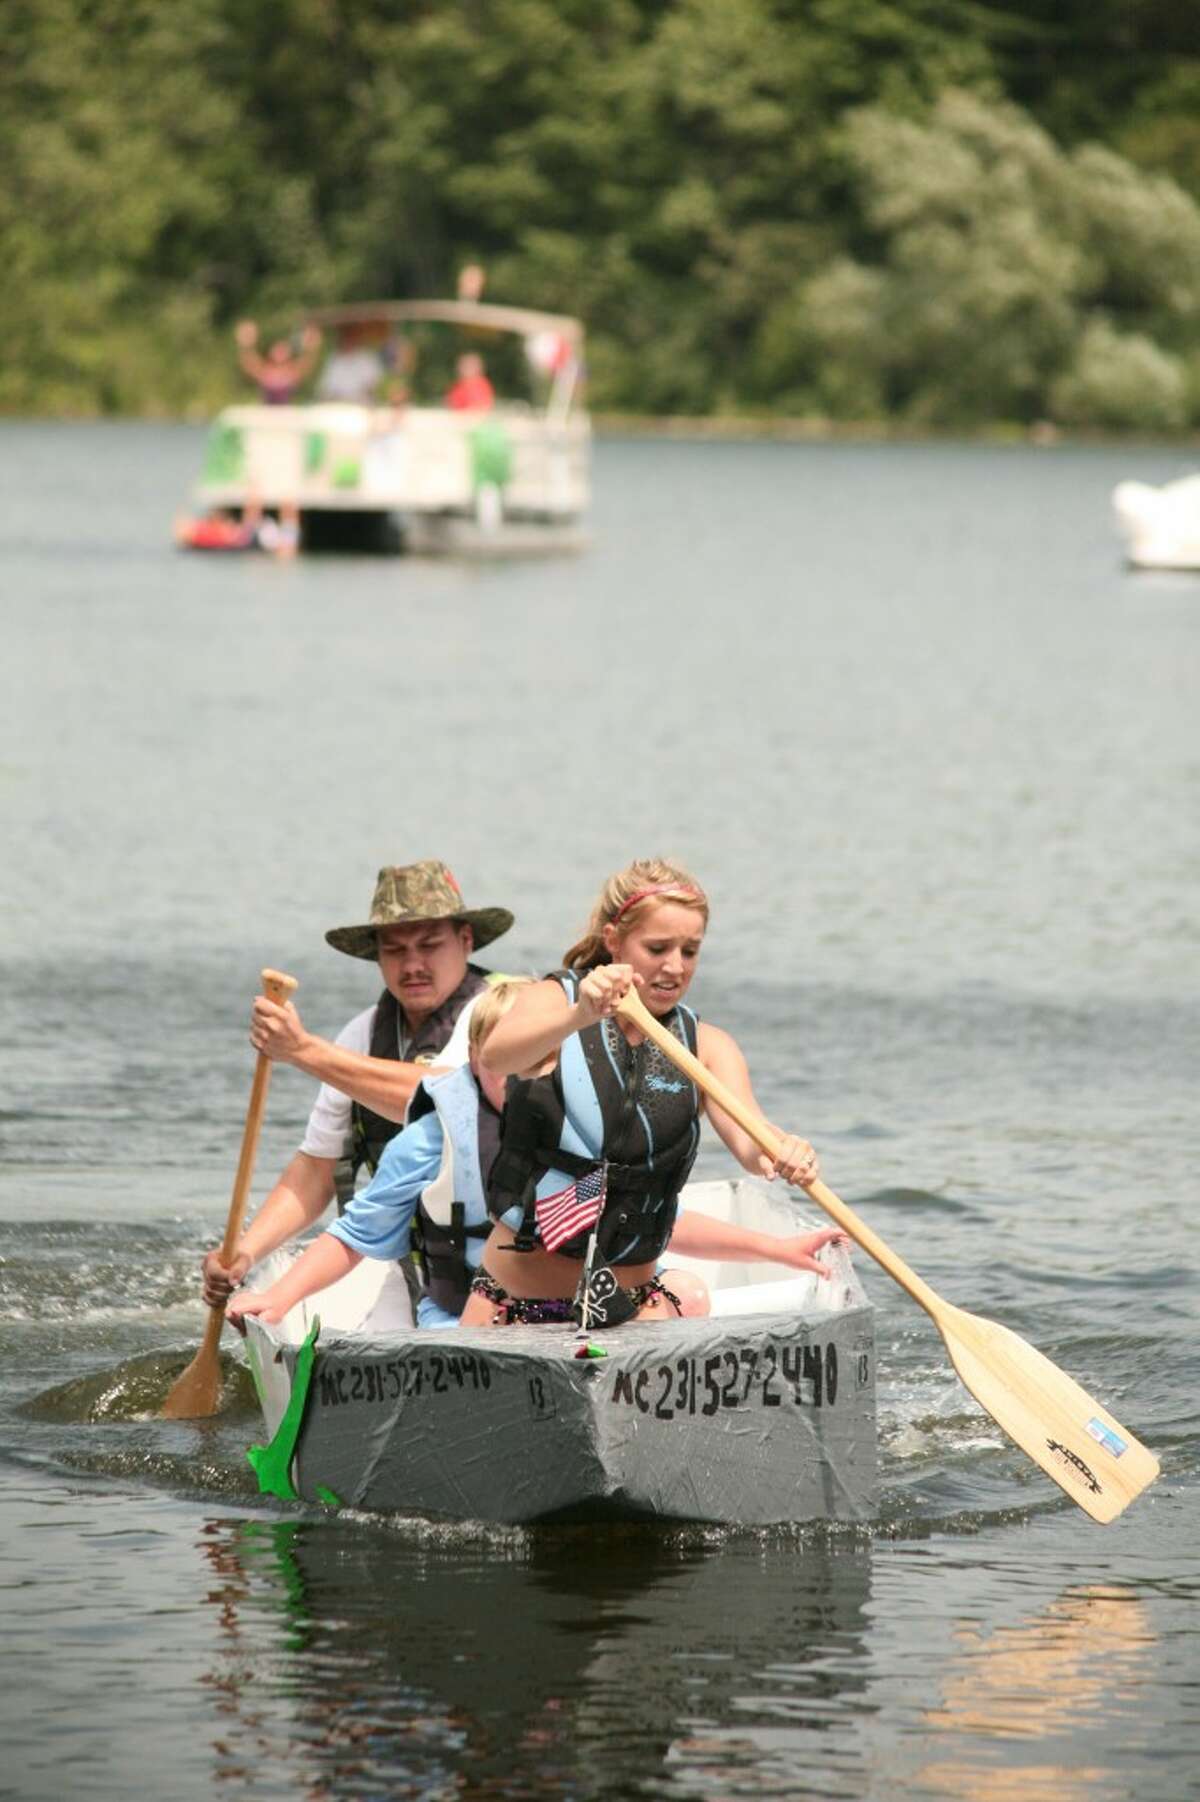 CARDBOARD BOAT: Joel Nichols (at stern) captains the "S.S. Let it Float" cardboard boat during Saturday's Damsel in Distress Rescue competition. The event was part of the inaugural Dam Festival in Rogers Heights.